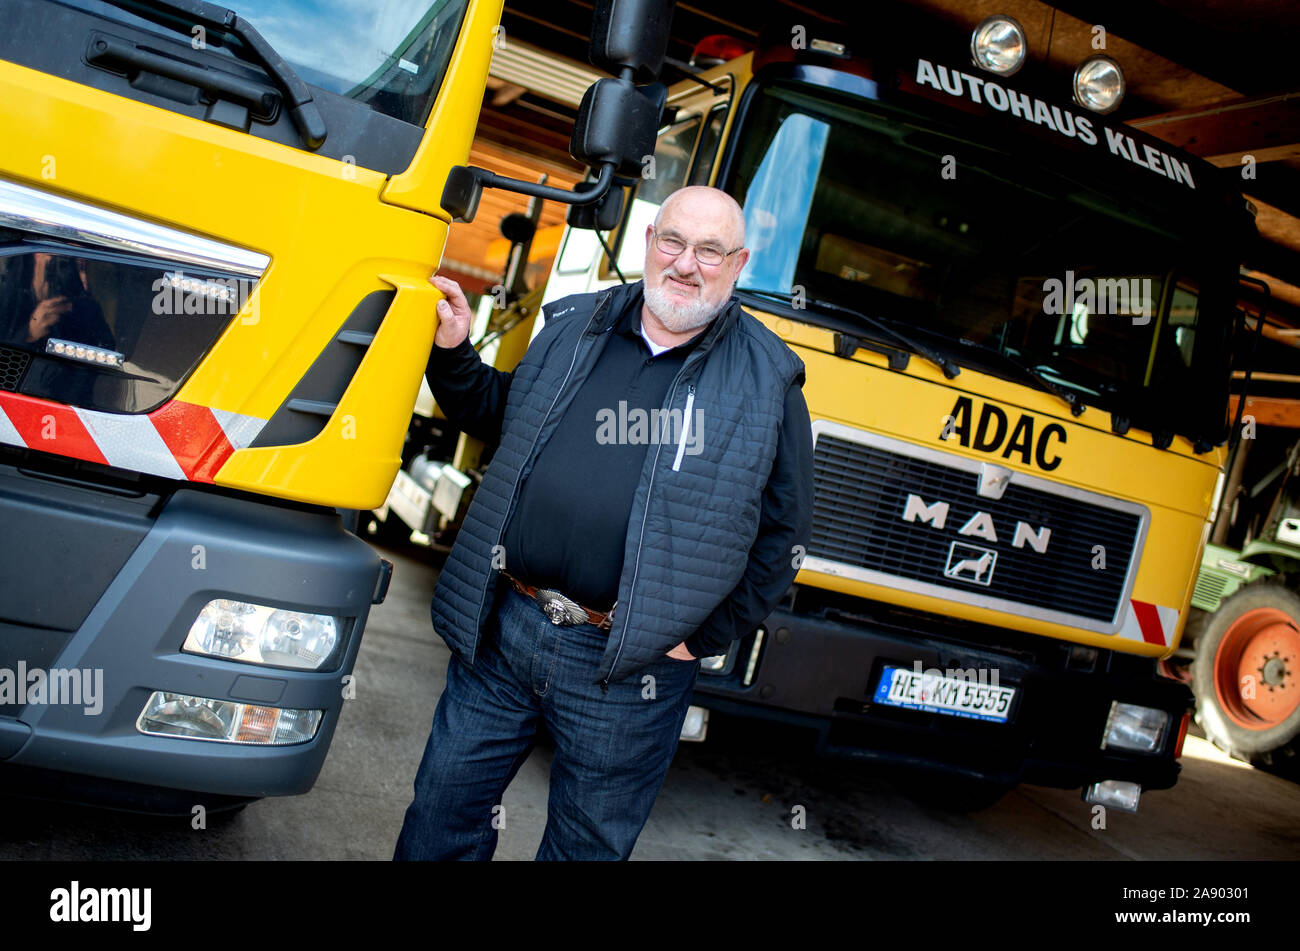 Mariental, Germany. 22nd Oct, 2019. Manfred Klein, former owner of a car dealership with car repair shop, stands at a recovery vehicle with the ADAC logo. The former breakdown helper on behalf of the ADAC witnessed the opening of the border at the Helmstedt-Marienborn border crossing and was able to help many drivers with Trabant and Wartburg after breakdowns or accidents on the A2 in the following months. Credit: Hauke-Christian Dittrich/dpa/Alamy Live News Stock Photo